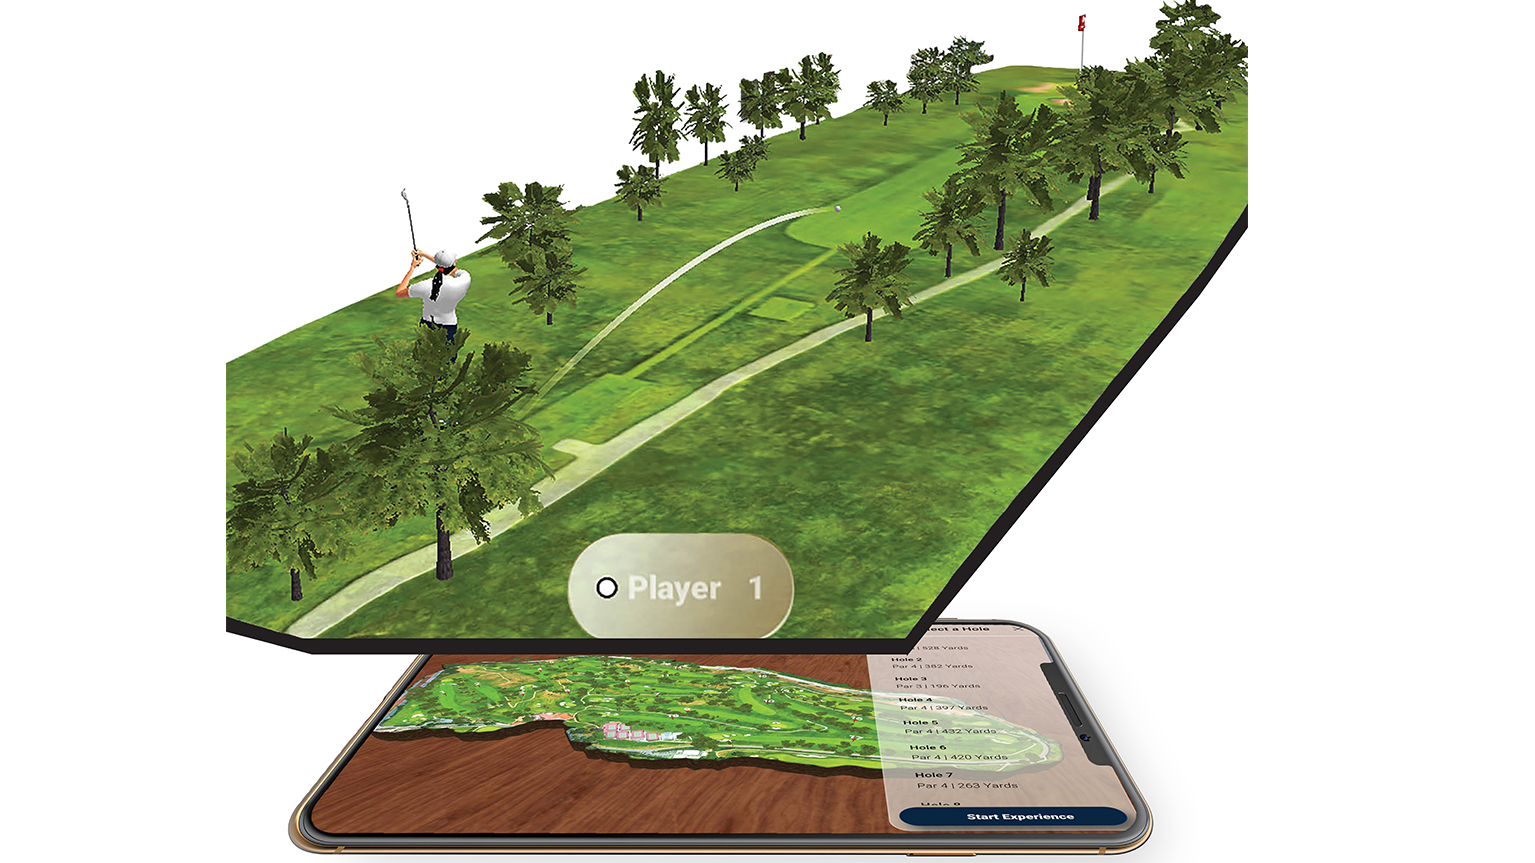 Deloitte and USGA Launch Augmented Reality App